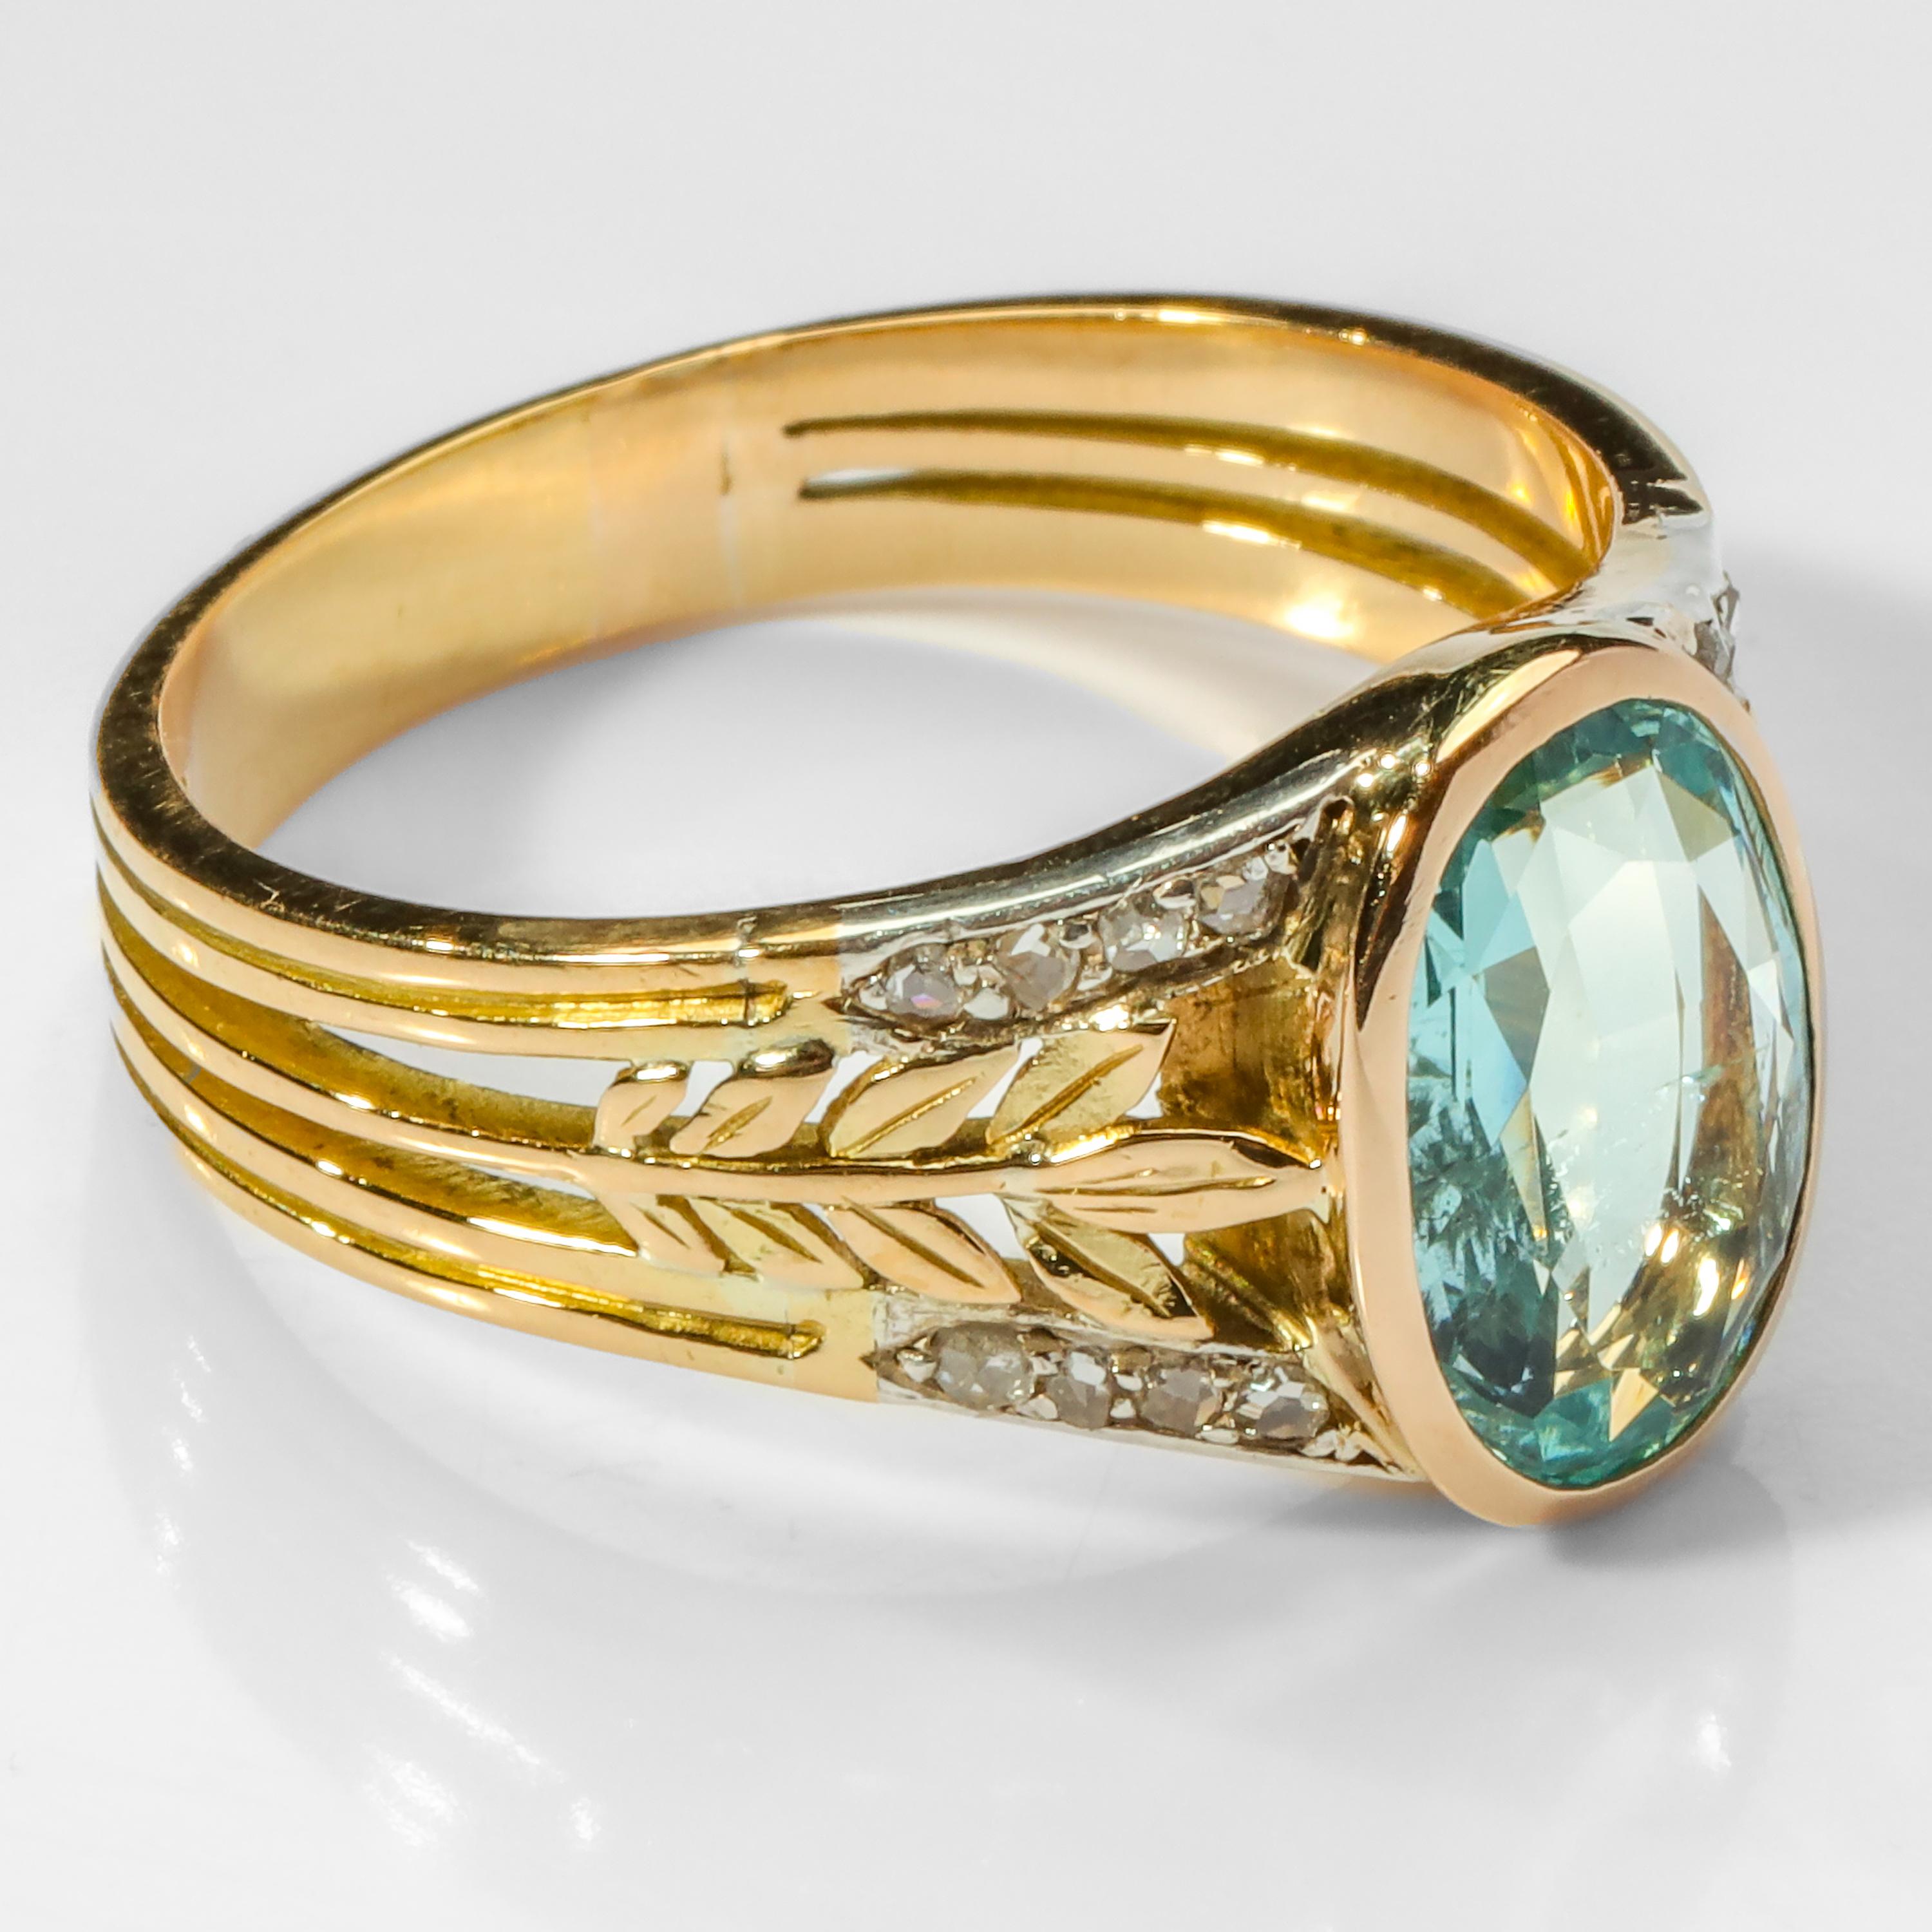 Women's or Men's Aquamarine Ring in Gold and Platinum with Diamonds from France, Titanic Era